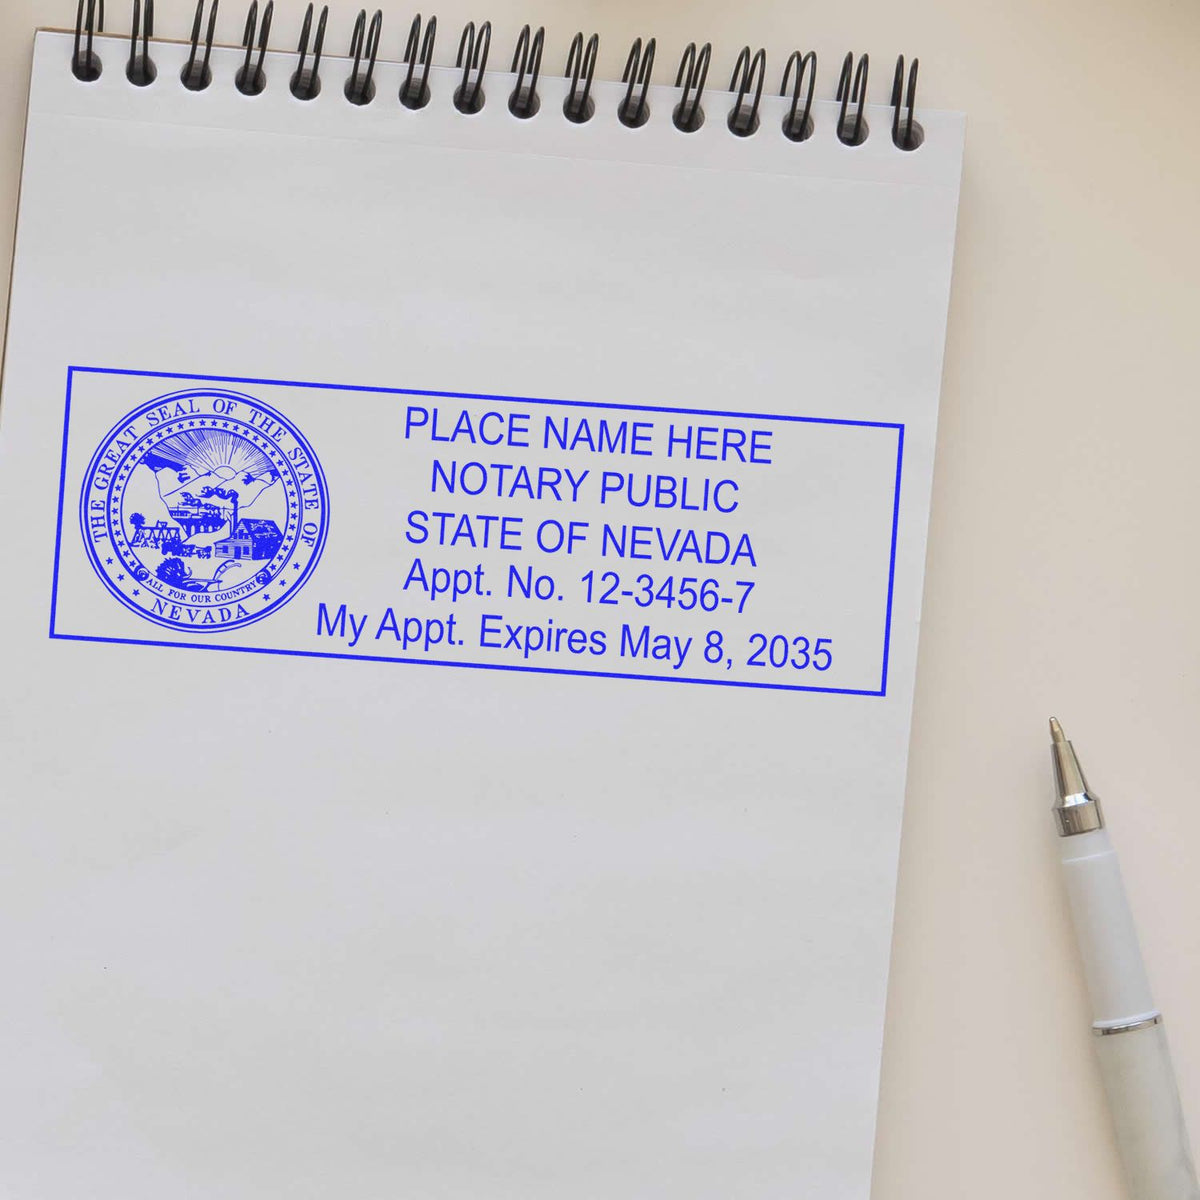 The MaxLight Premium Pre-Inked Nevada State Seal Notarial Stamp stamp impression comes to life with a crisp, detailed photo on paper - showcasing true professional quality.